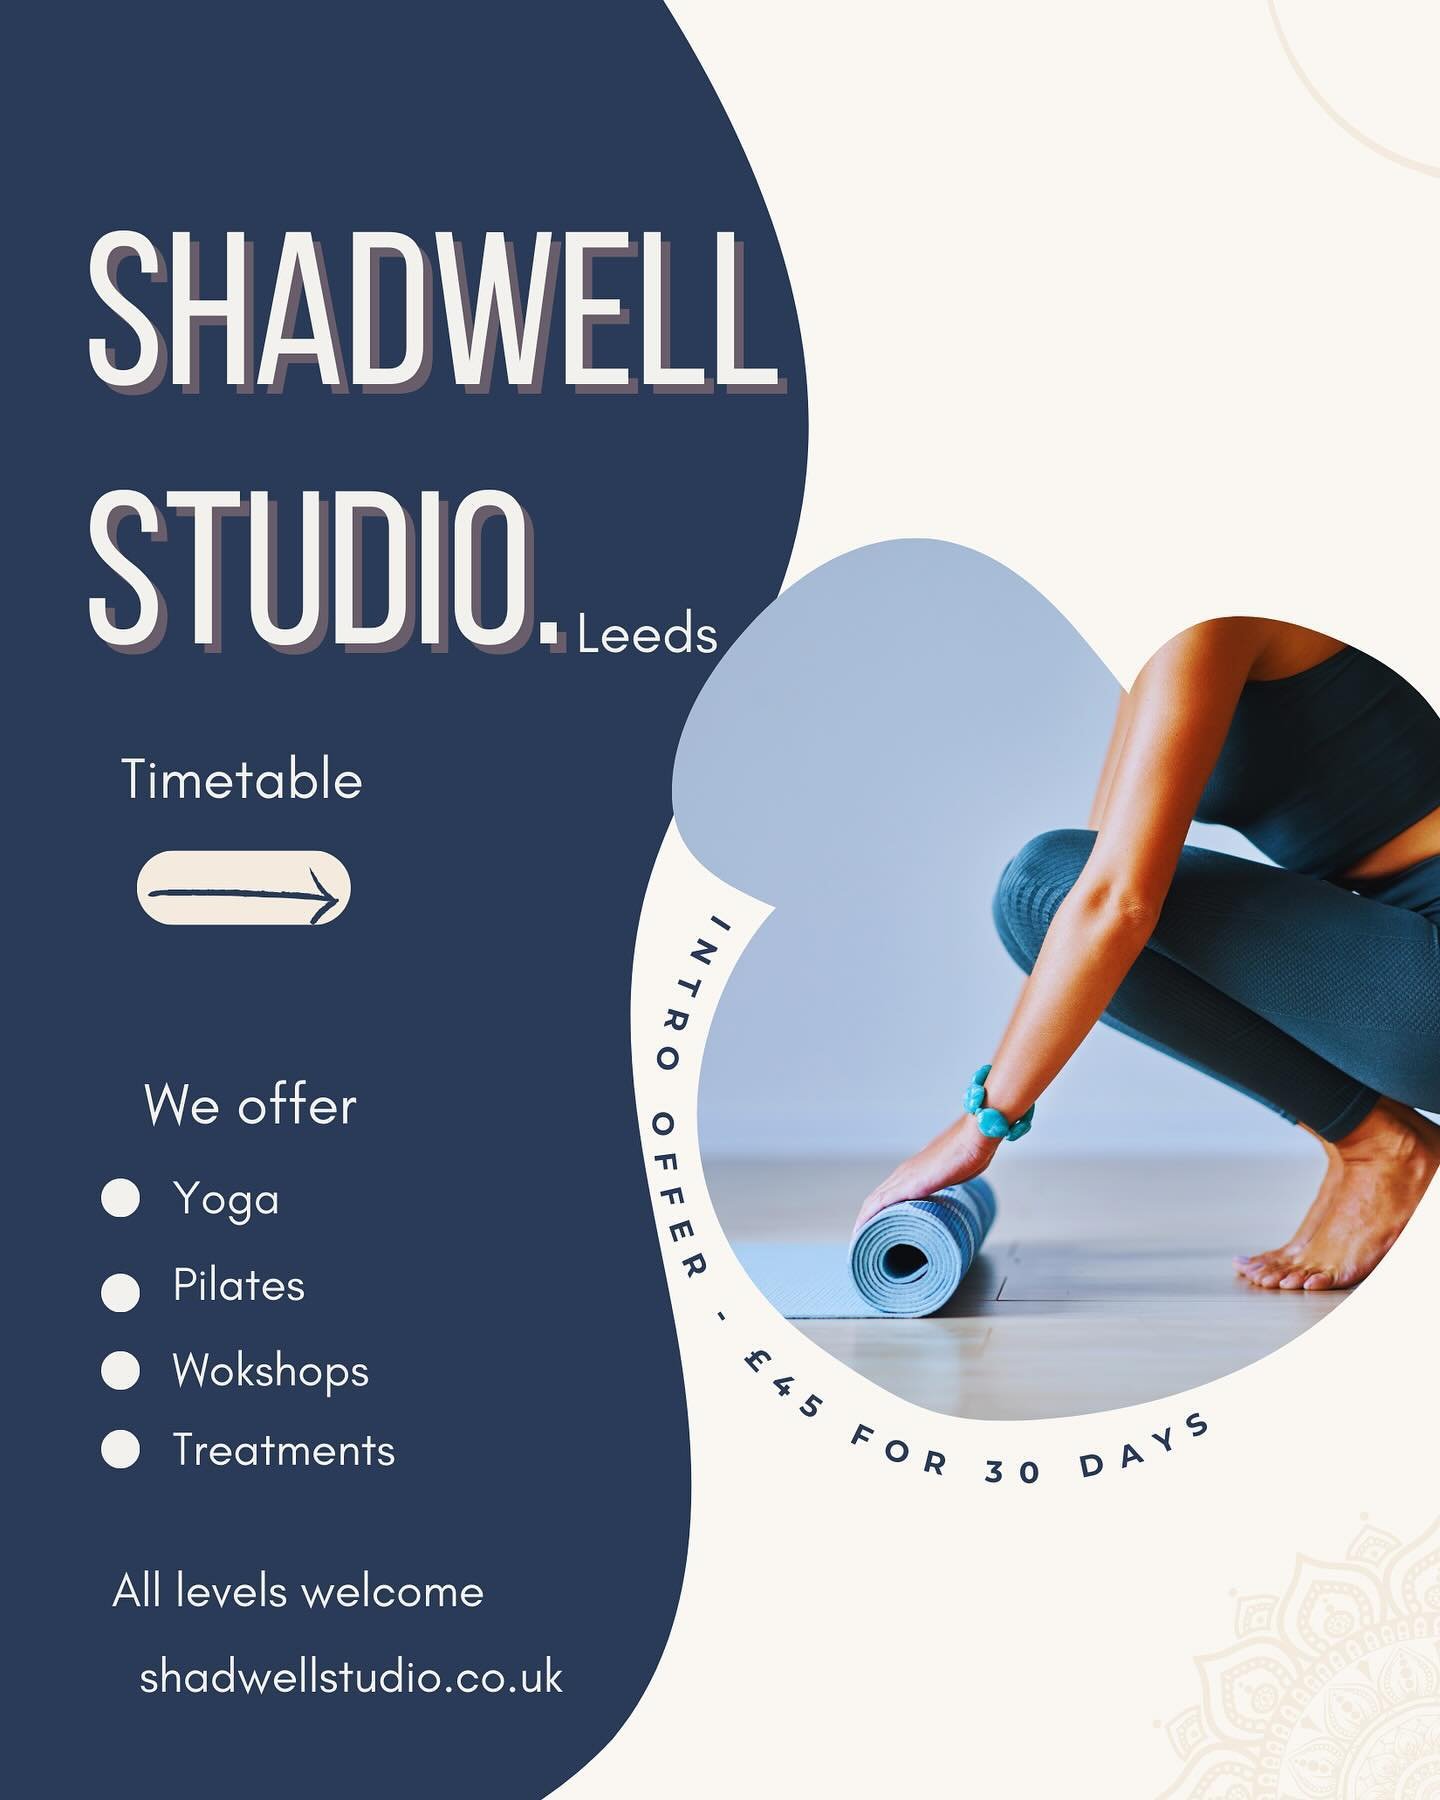 Shadwell Studio, North Leeds

Welcome to Yoga &amp; Pilates on your doorstep.

We have classes for all levels and if you&rsquo;re unsure which class is for you then feel free to reach out.

We love to welcome everyone with our best offer of &pound;45